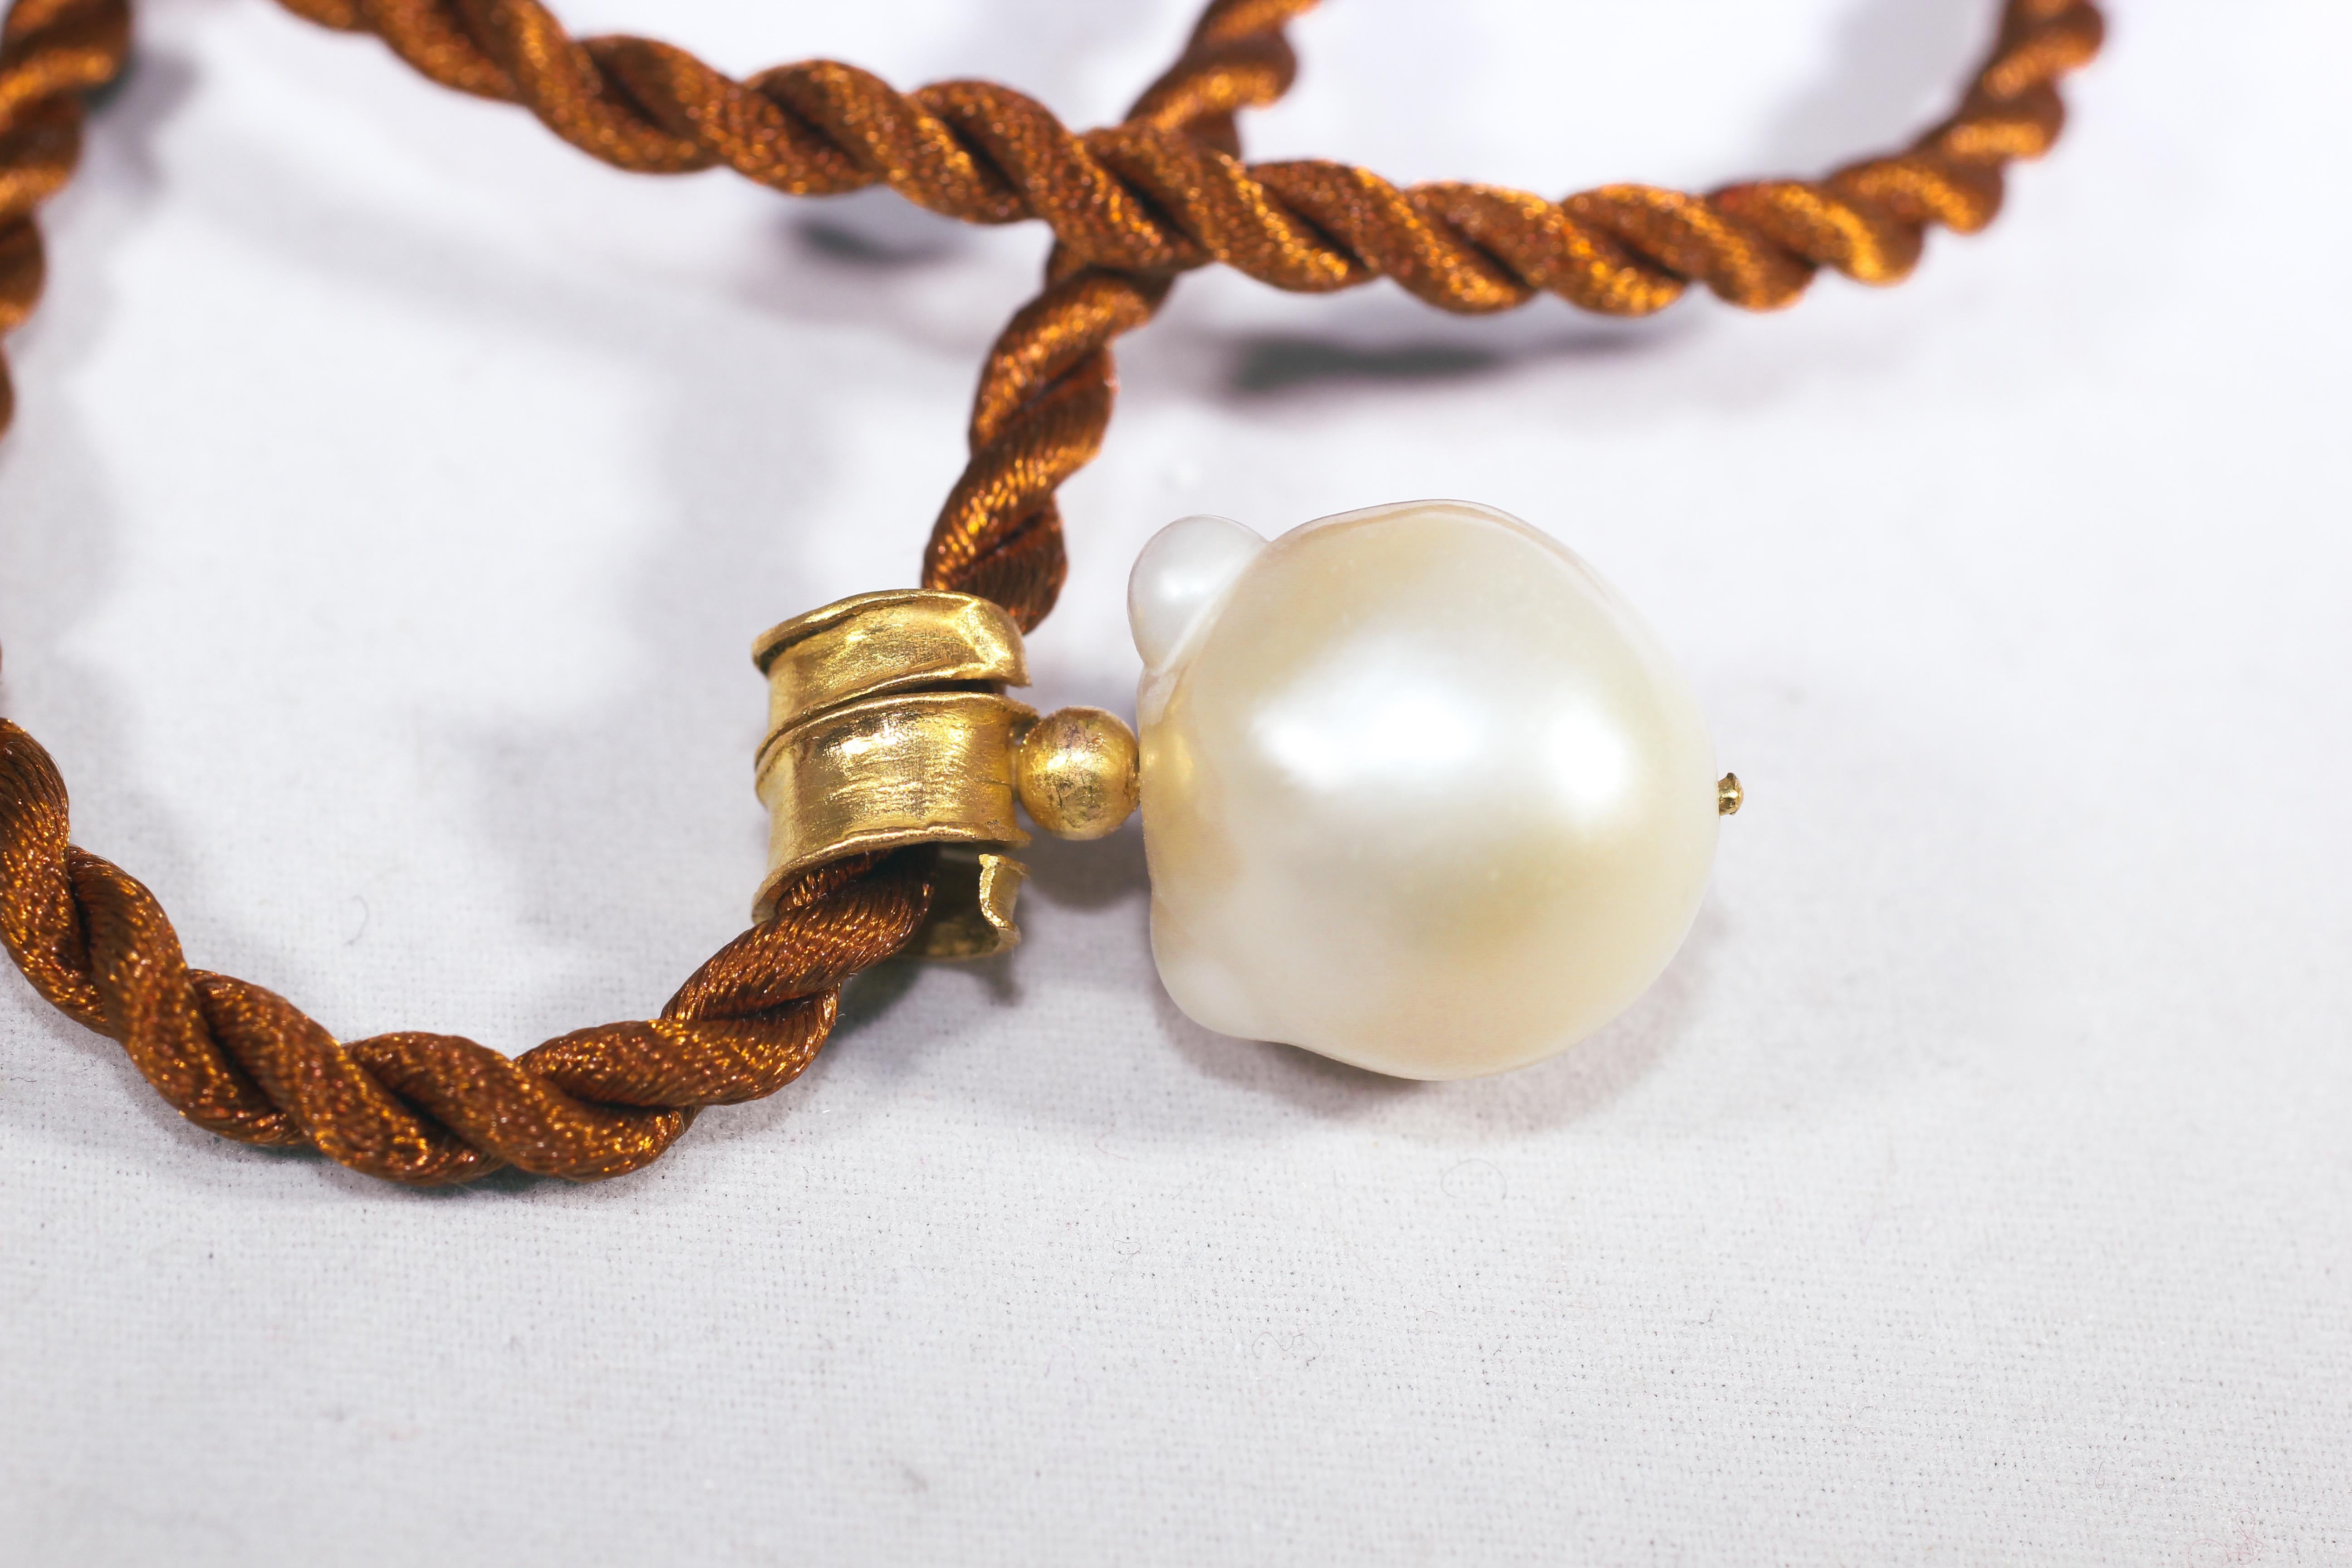 In The Sea South Sea pendant. Made to order, custom-made hand-formed choker pendant necklace. White Baroque South Sea pearl hangs off of organically shaped bail hand forged of 21K gold. No two necklaces are identical. 

The inspiration for this